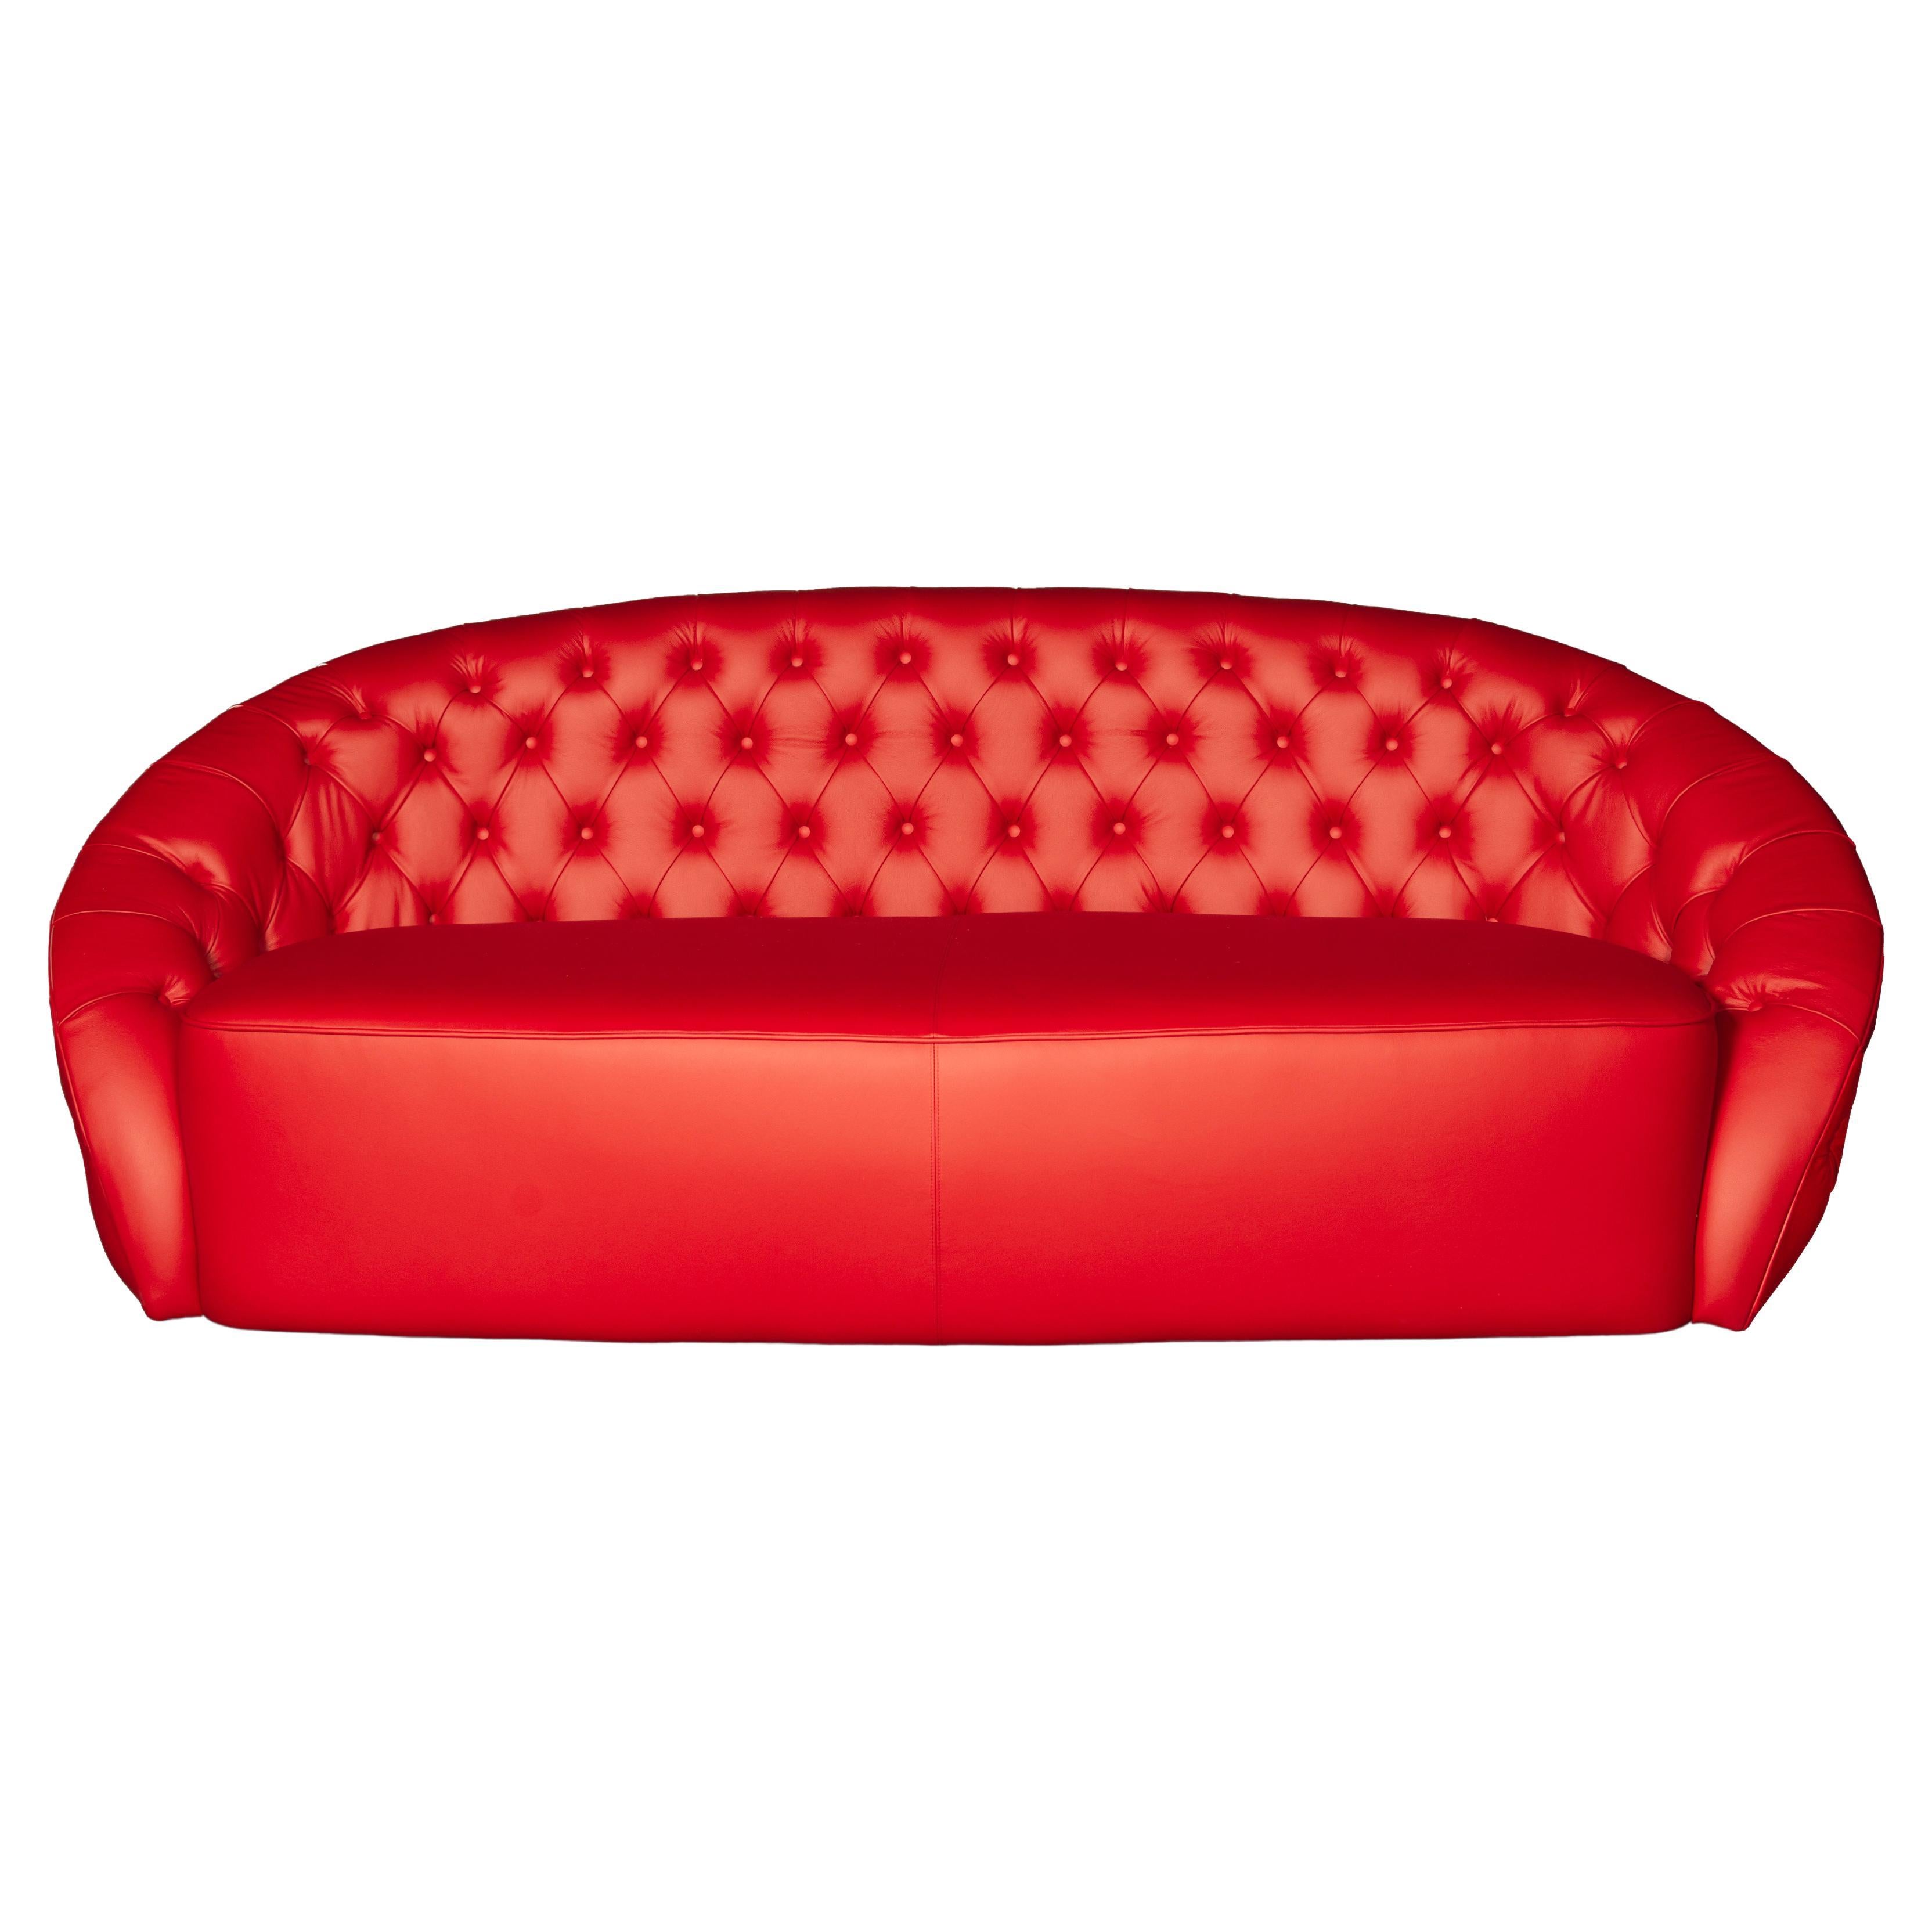 Sofa Round Capitonné, Red Leather, cm 210x115, Made in Italy For Sale